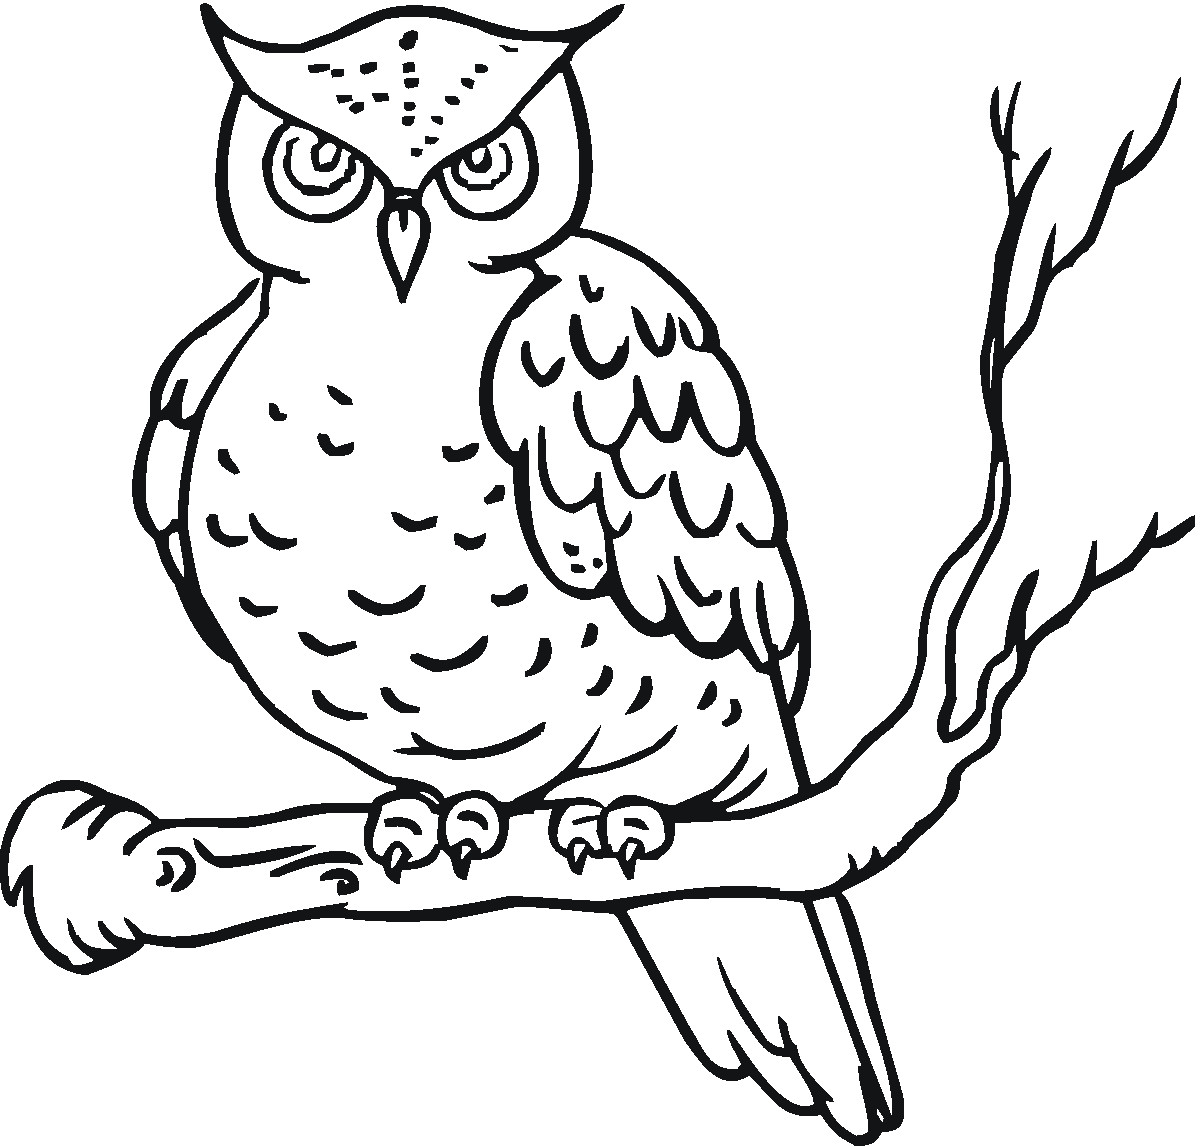 Owl Coloring Pages For Kids Printable
 Free Printable Owl Coloring Pages For Kids